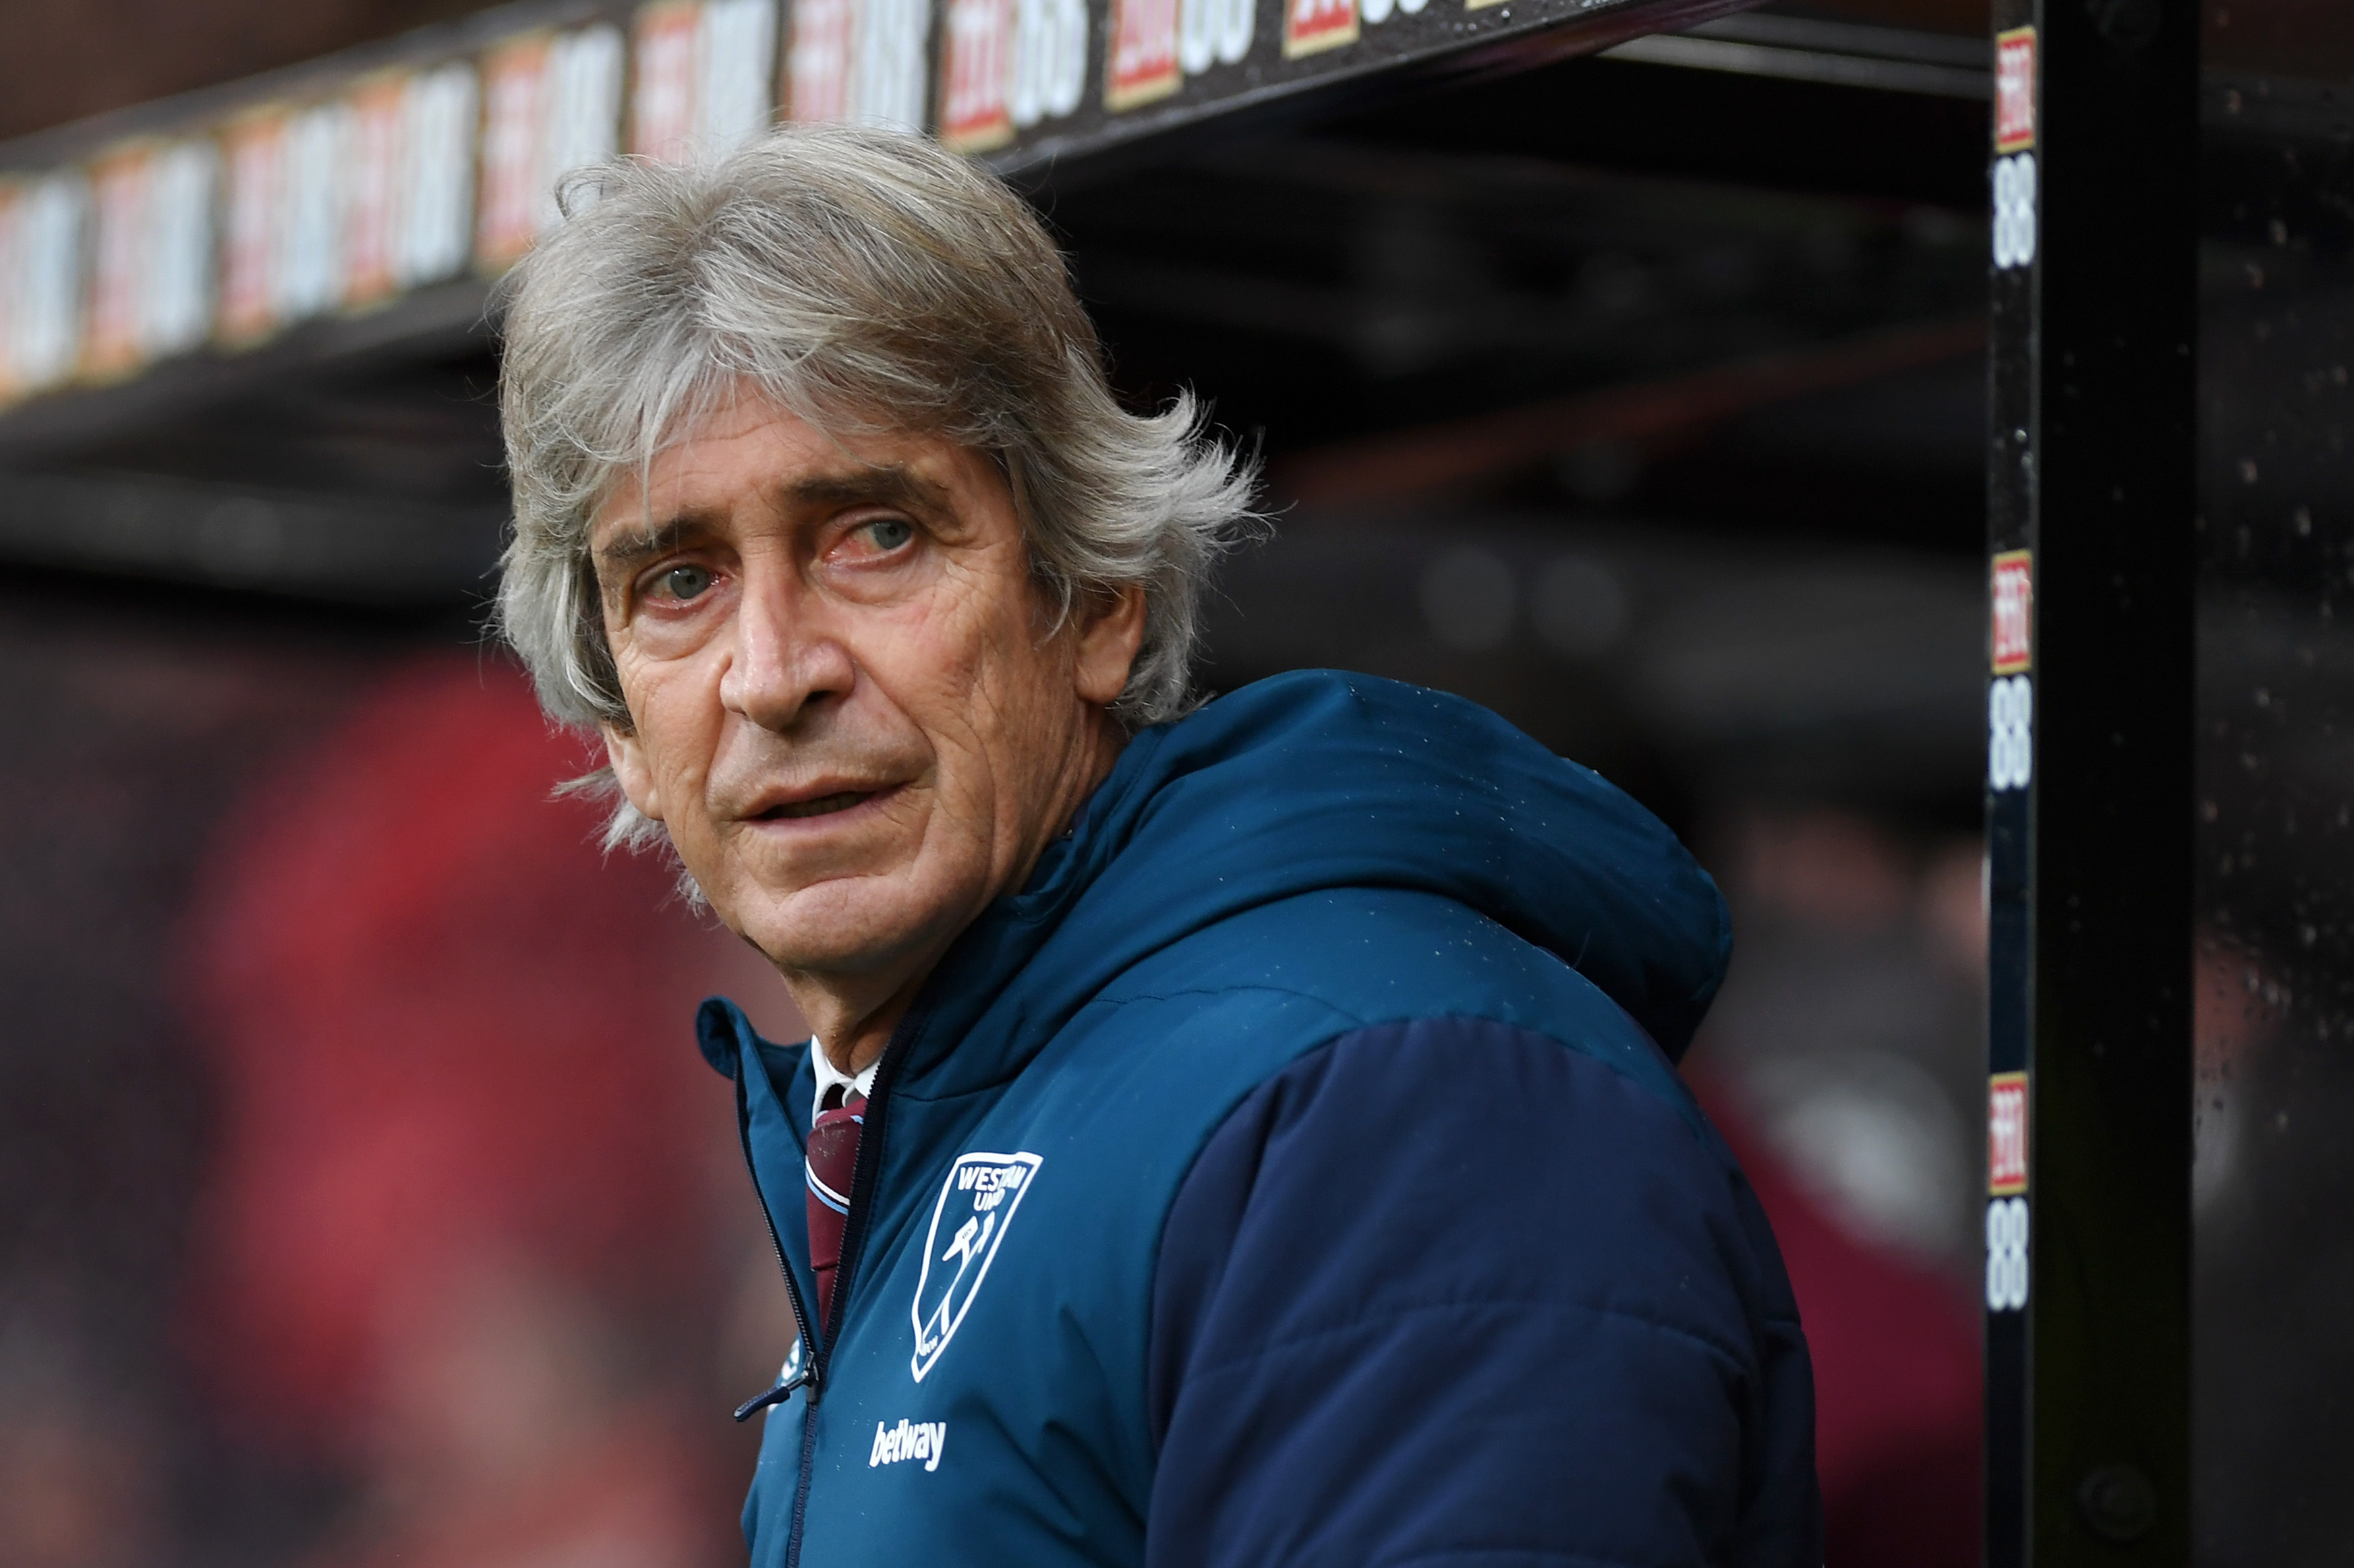 BOURNEMOUTH, ENGLAND - JANUARY 19: Manuel Pellegrini, Manager of West Ham United looks on prior to the Premier League match between AFC Bournemouth and West Ham United at Vitality Stadium on January 19, 2019 in Bournemouth, United Kingdom.  (Photo by Mike Hewitt/Getty Images)